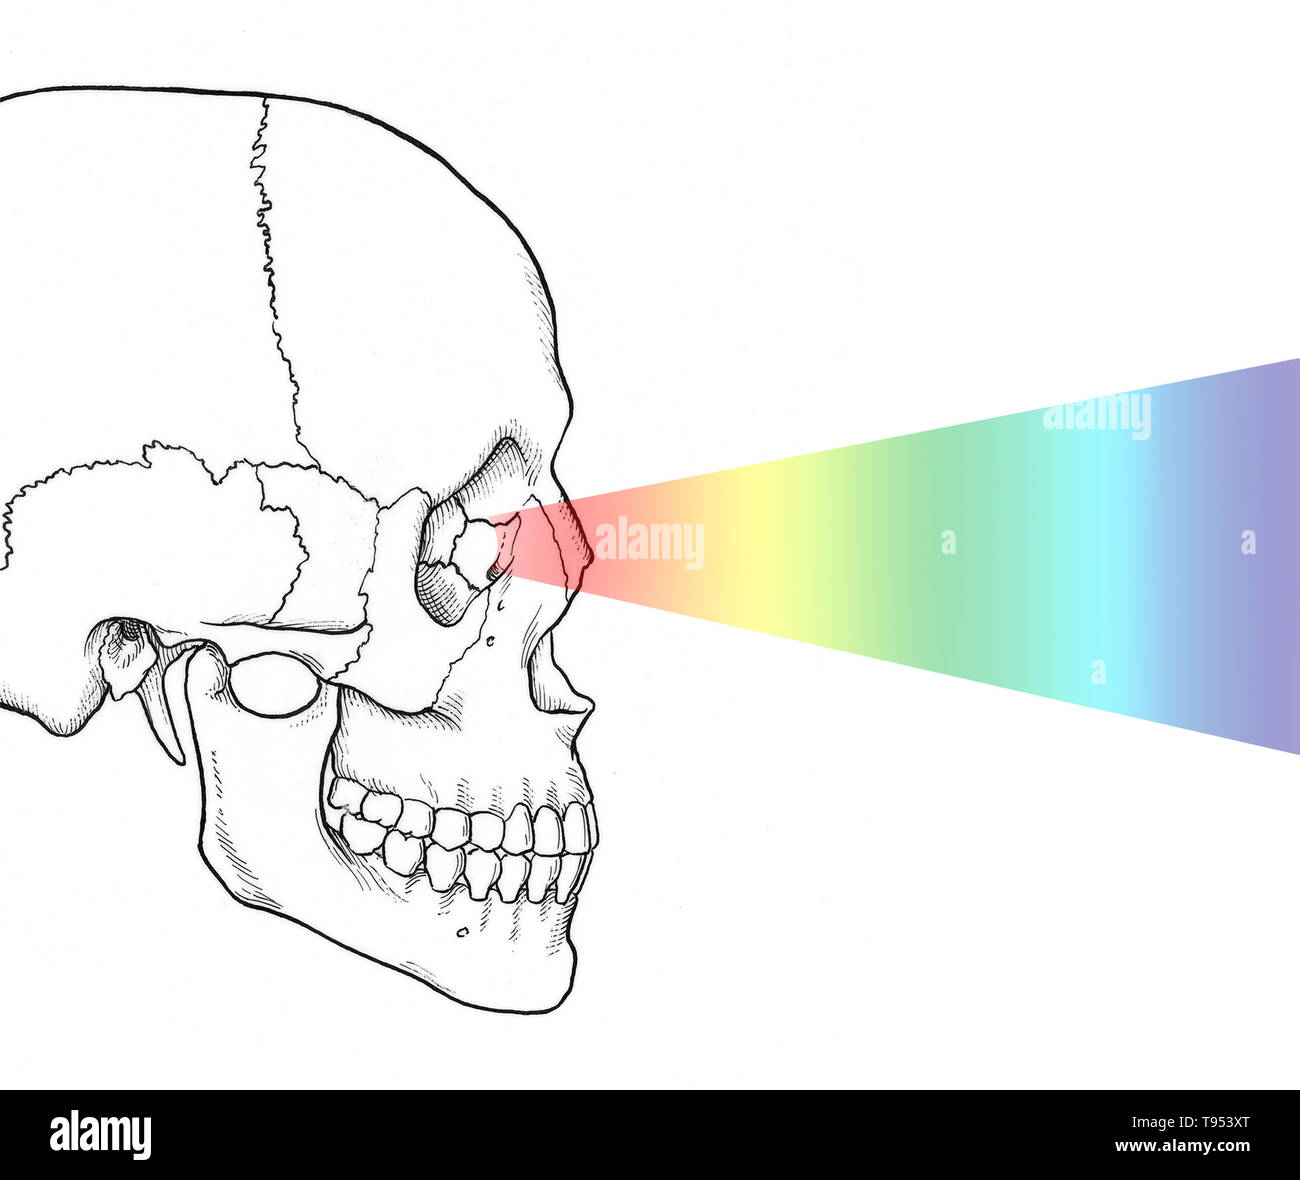 Illustration of the eye perceiving visible light. Stock Photo